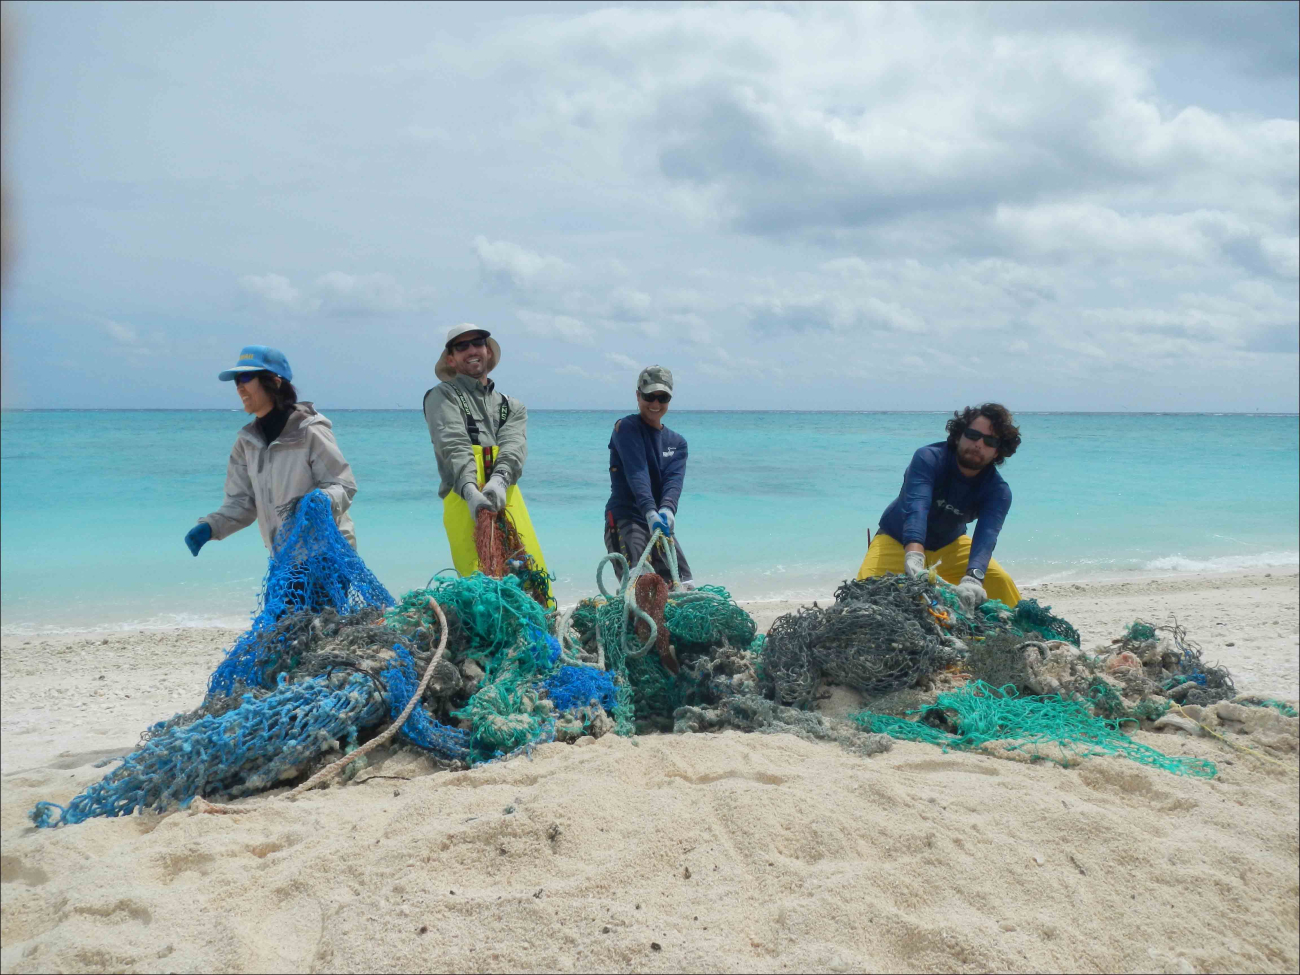 Tomoko Acoba, Russell Reardon, Kerrie Krosky, and Joao Garriquesremove a large, buried derelict fishing net from the beach at Eastern Island